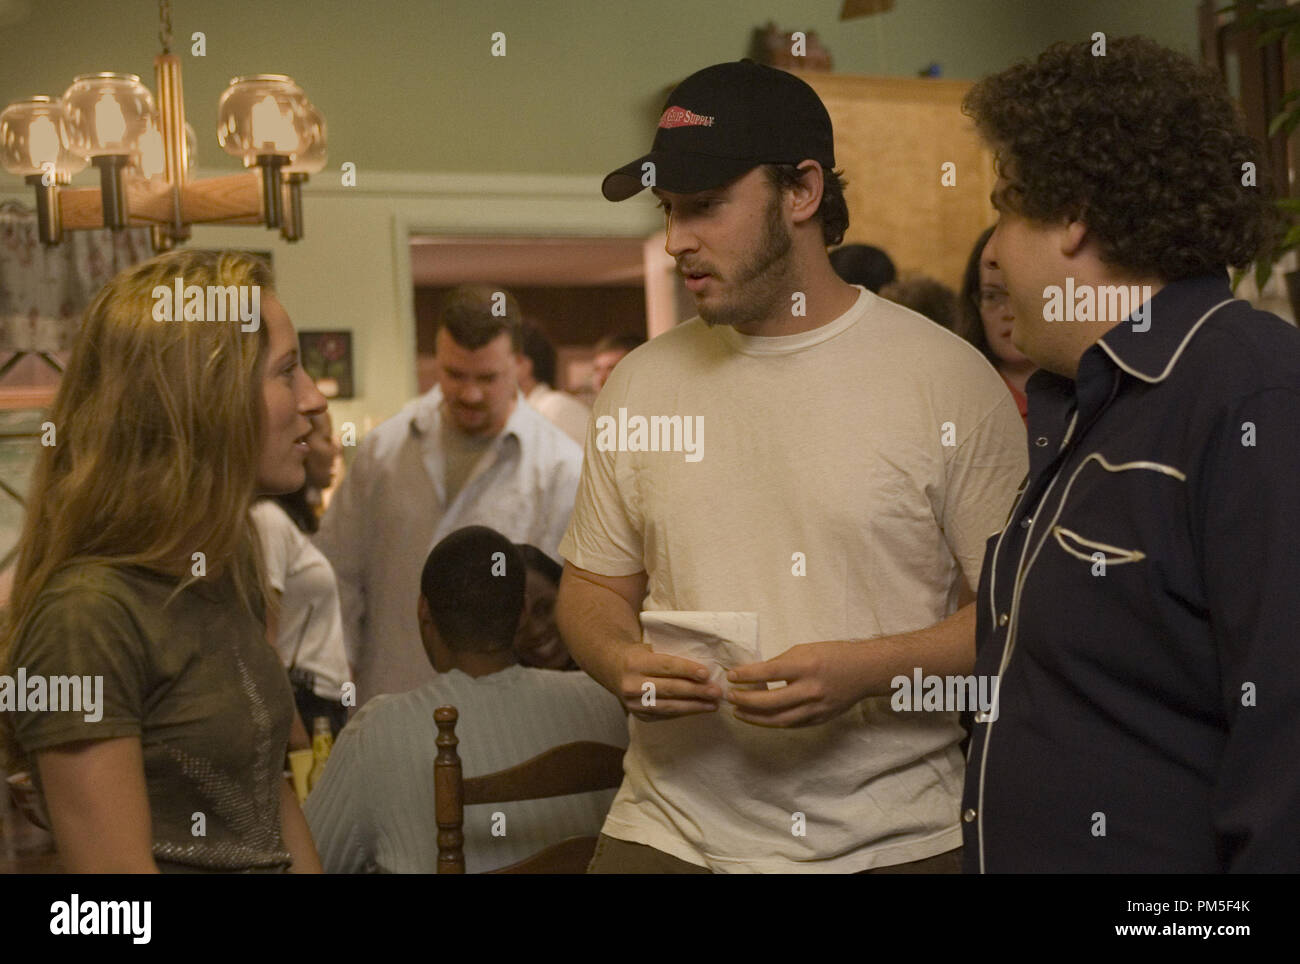 Studio Publicity Still from 'Superbad' Shauna Robertson, Evan Goldberg, Jonah Hill © 2007 Columbia Pictures Photo credit: Melissa Moseley    File Reference # 307381414THA  For Editorial Use Only -  All Rights Reserved Stock Photo